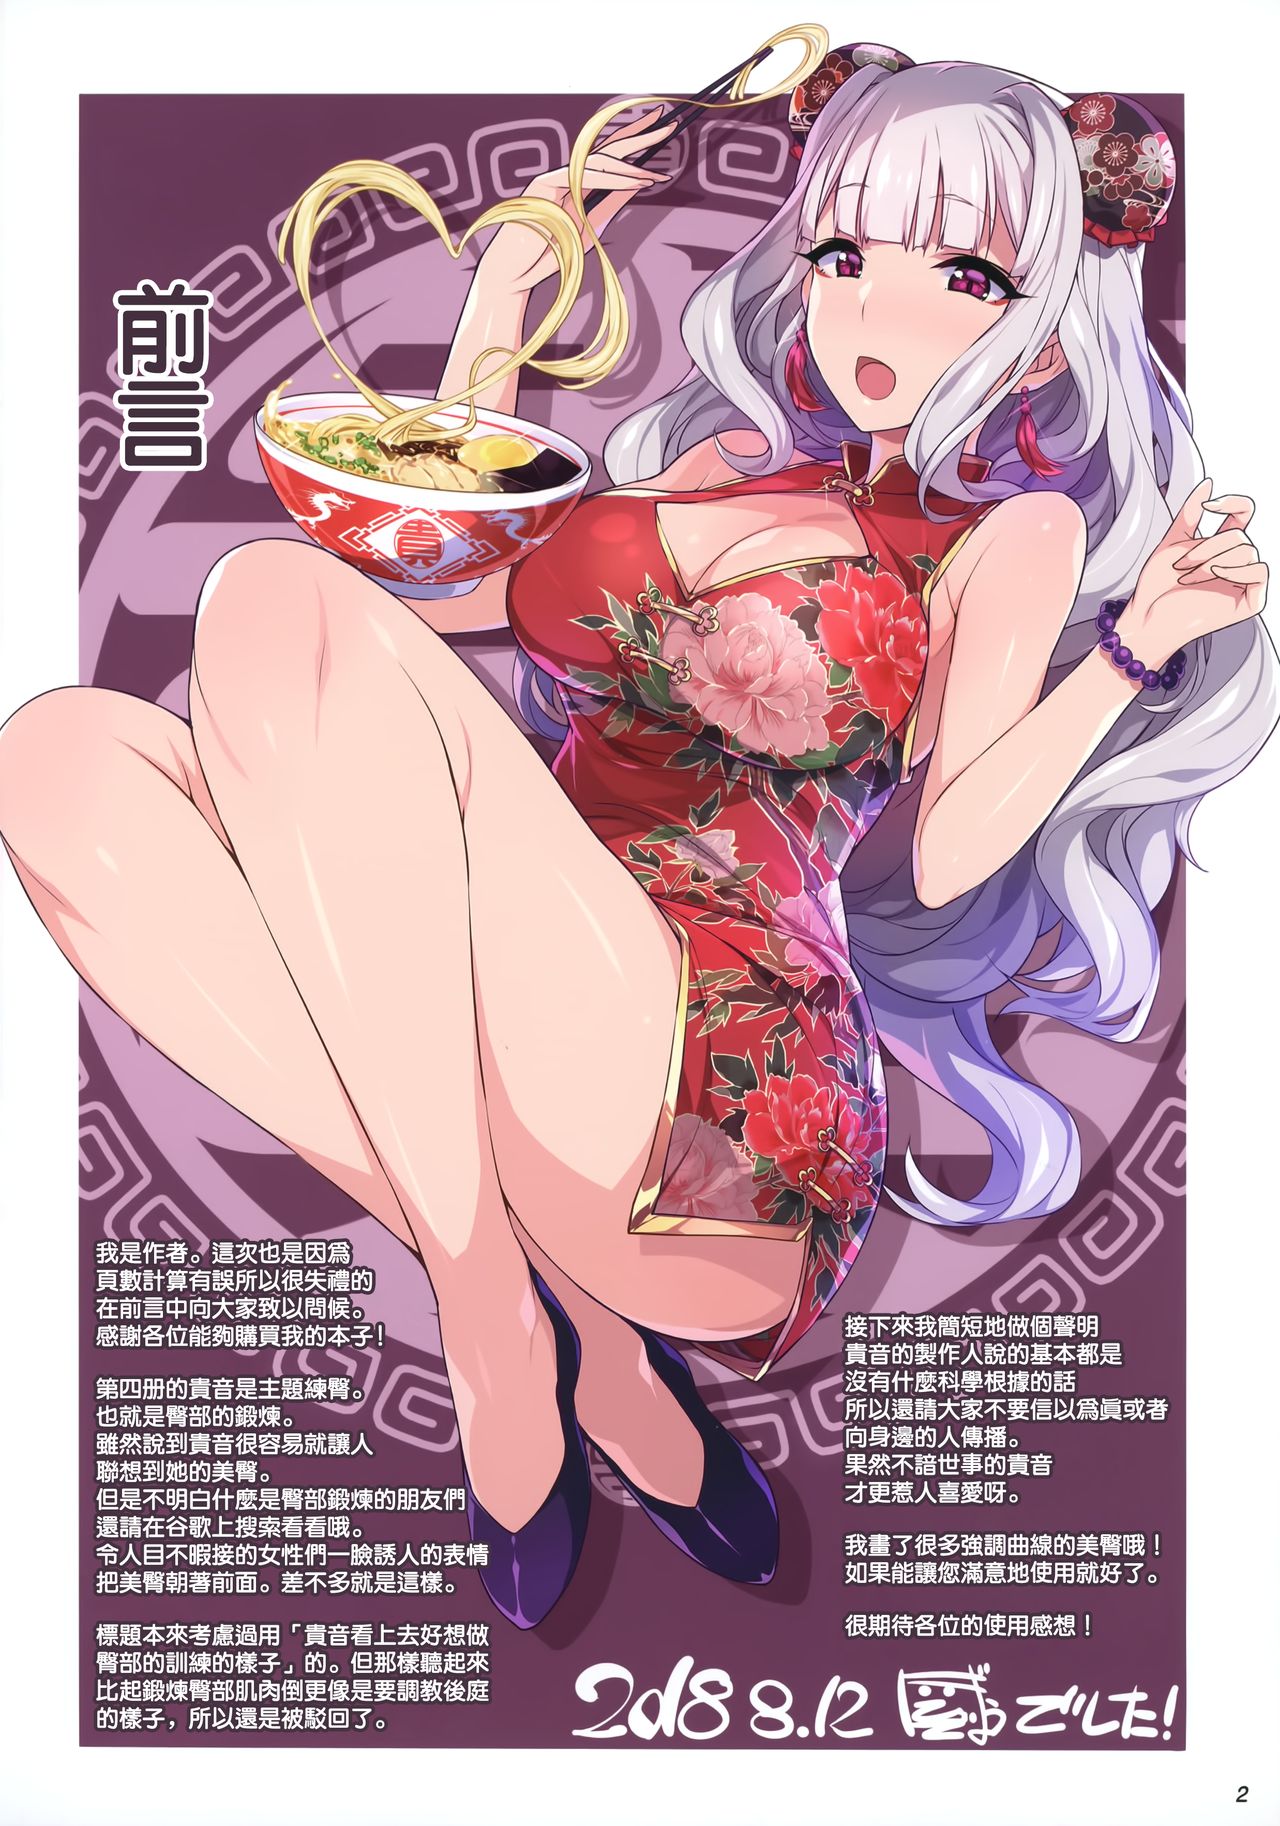 (C94) [Hidebou House (Hidebou)] Takane Training (THE iDOLM@STER) [Chinese] [无毒汉化组] page 3 full